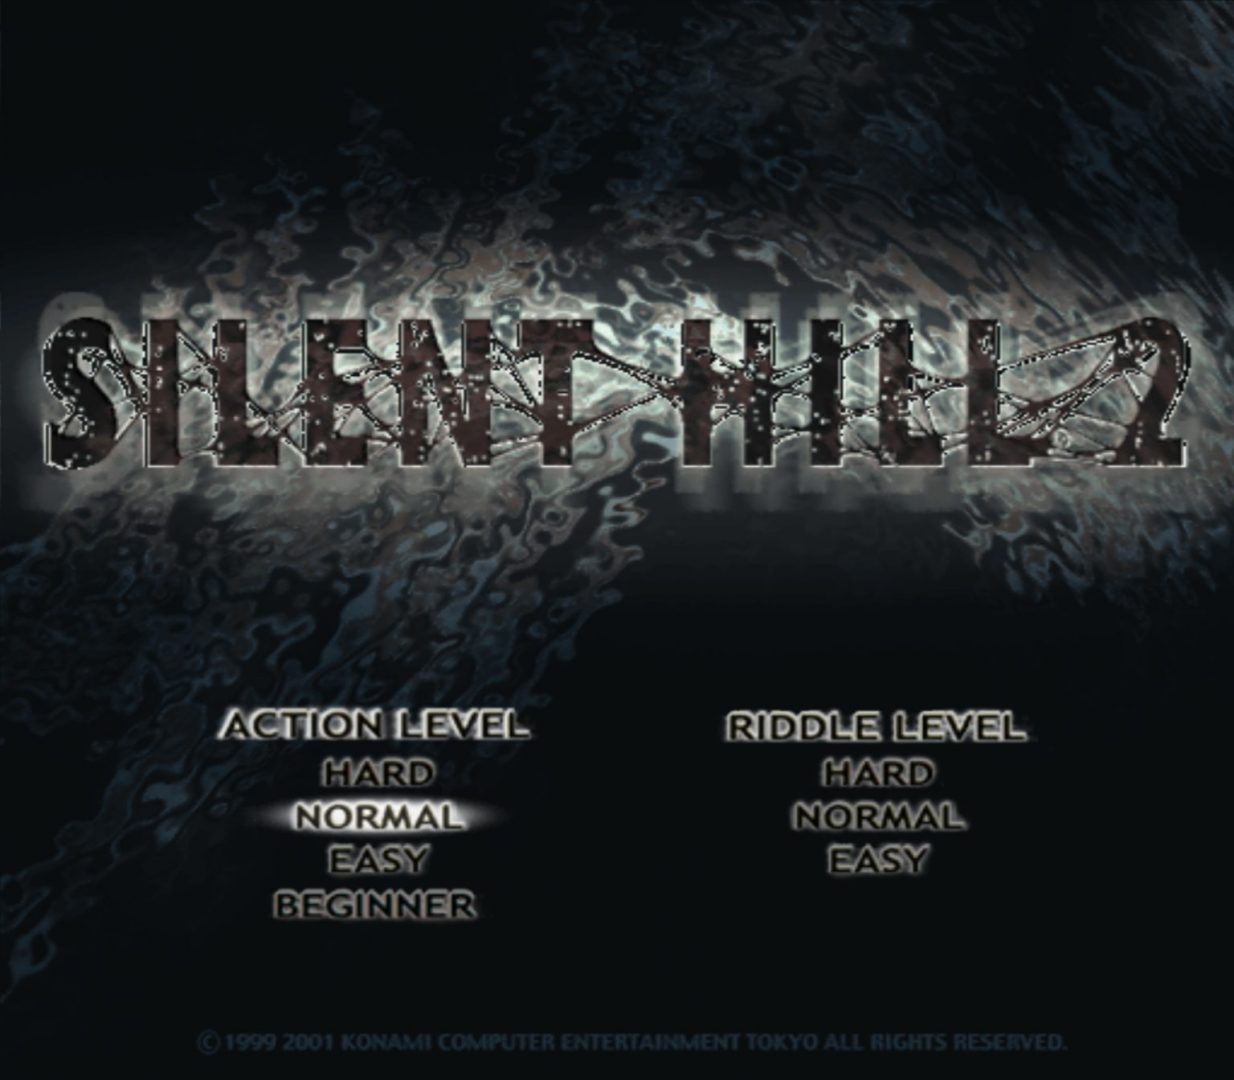 Silent Hill 2 (Europe) PS2 ISO - CDRomance